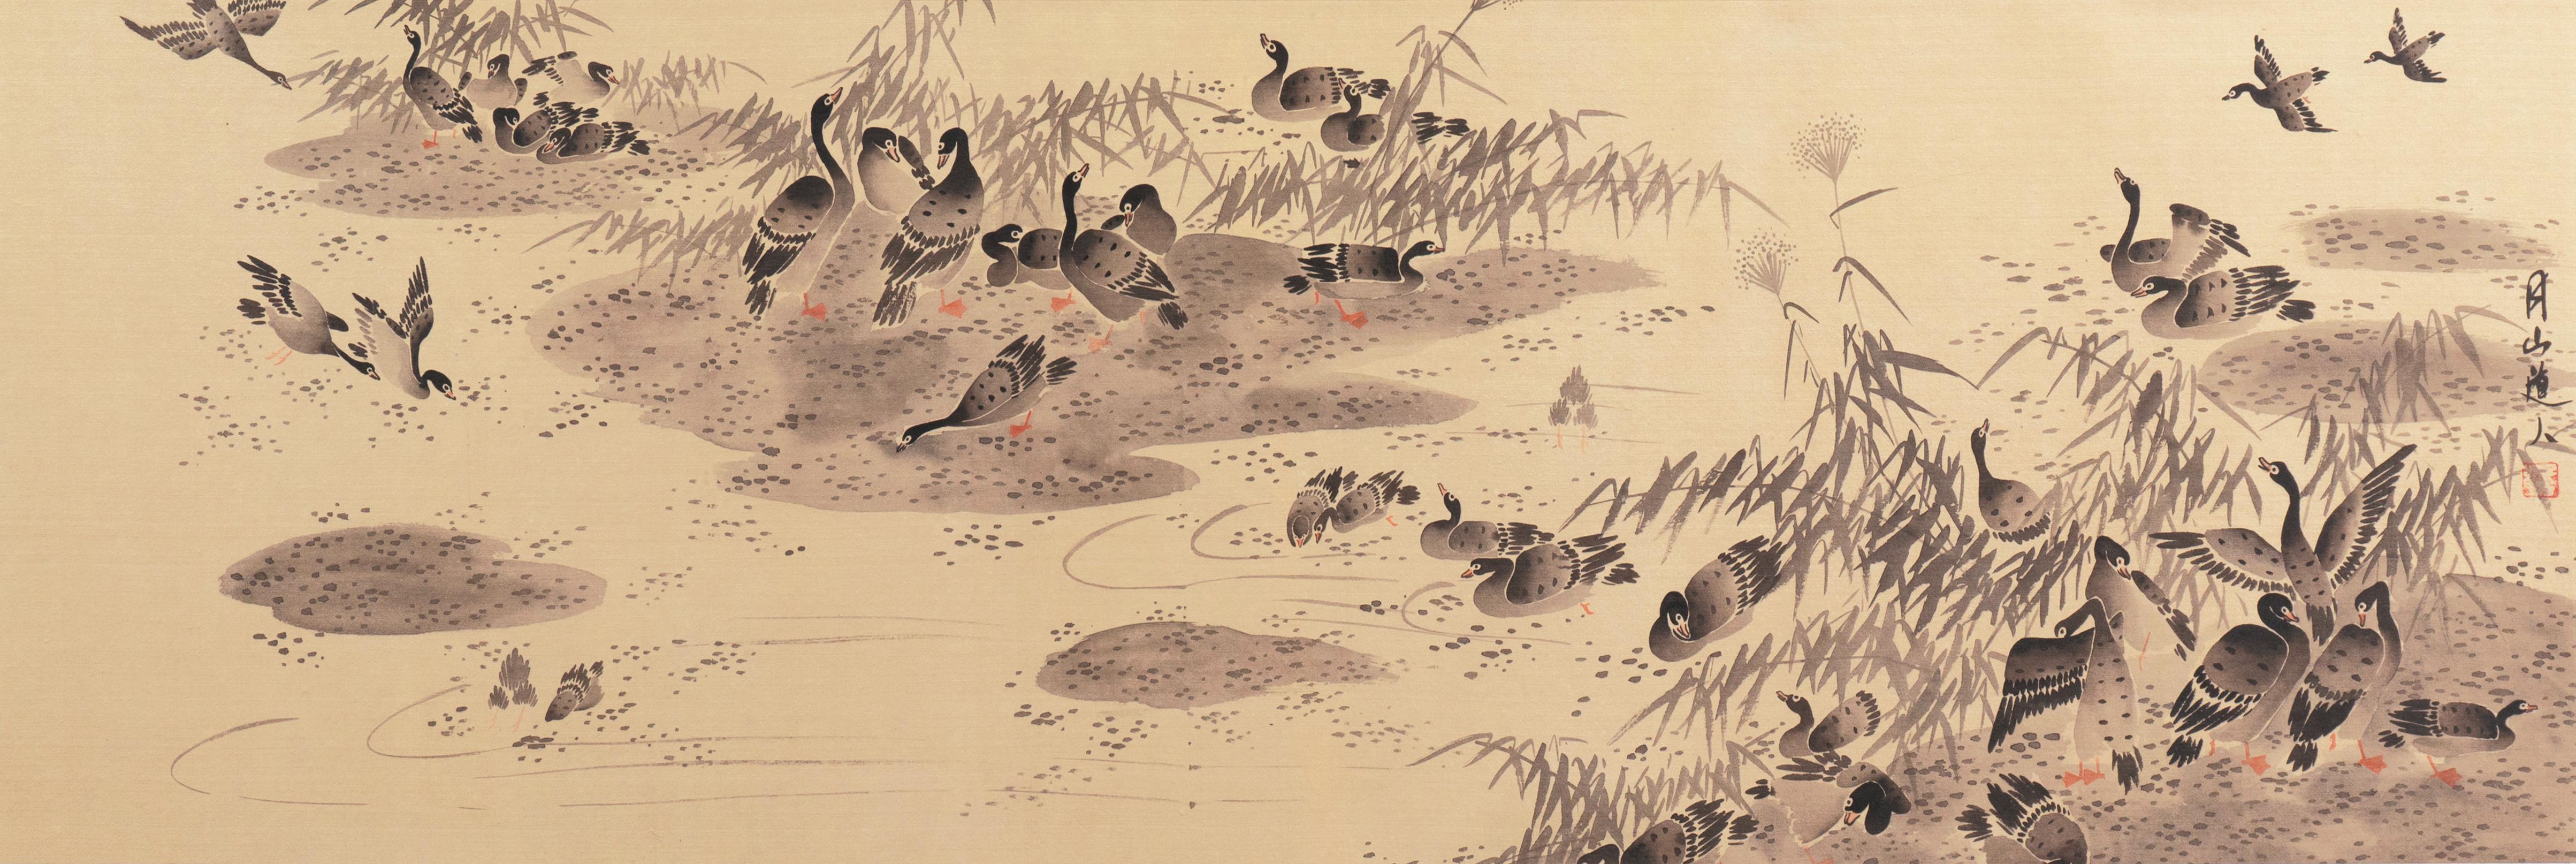 Ren Renfa Landscape Painting -  'Geese on a Lake', Chinese scroll, calligraphy, Sumi-e, Song, Yuan Dynasty